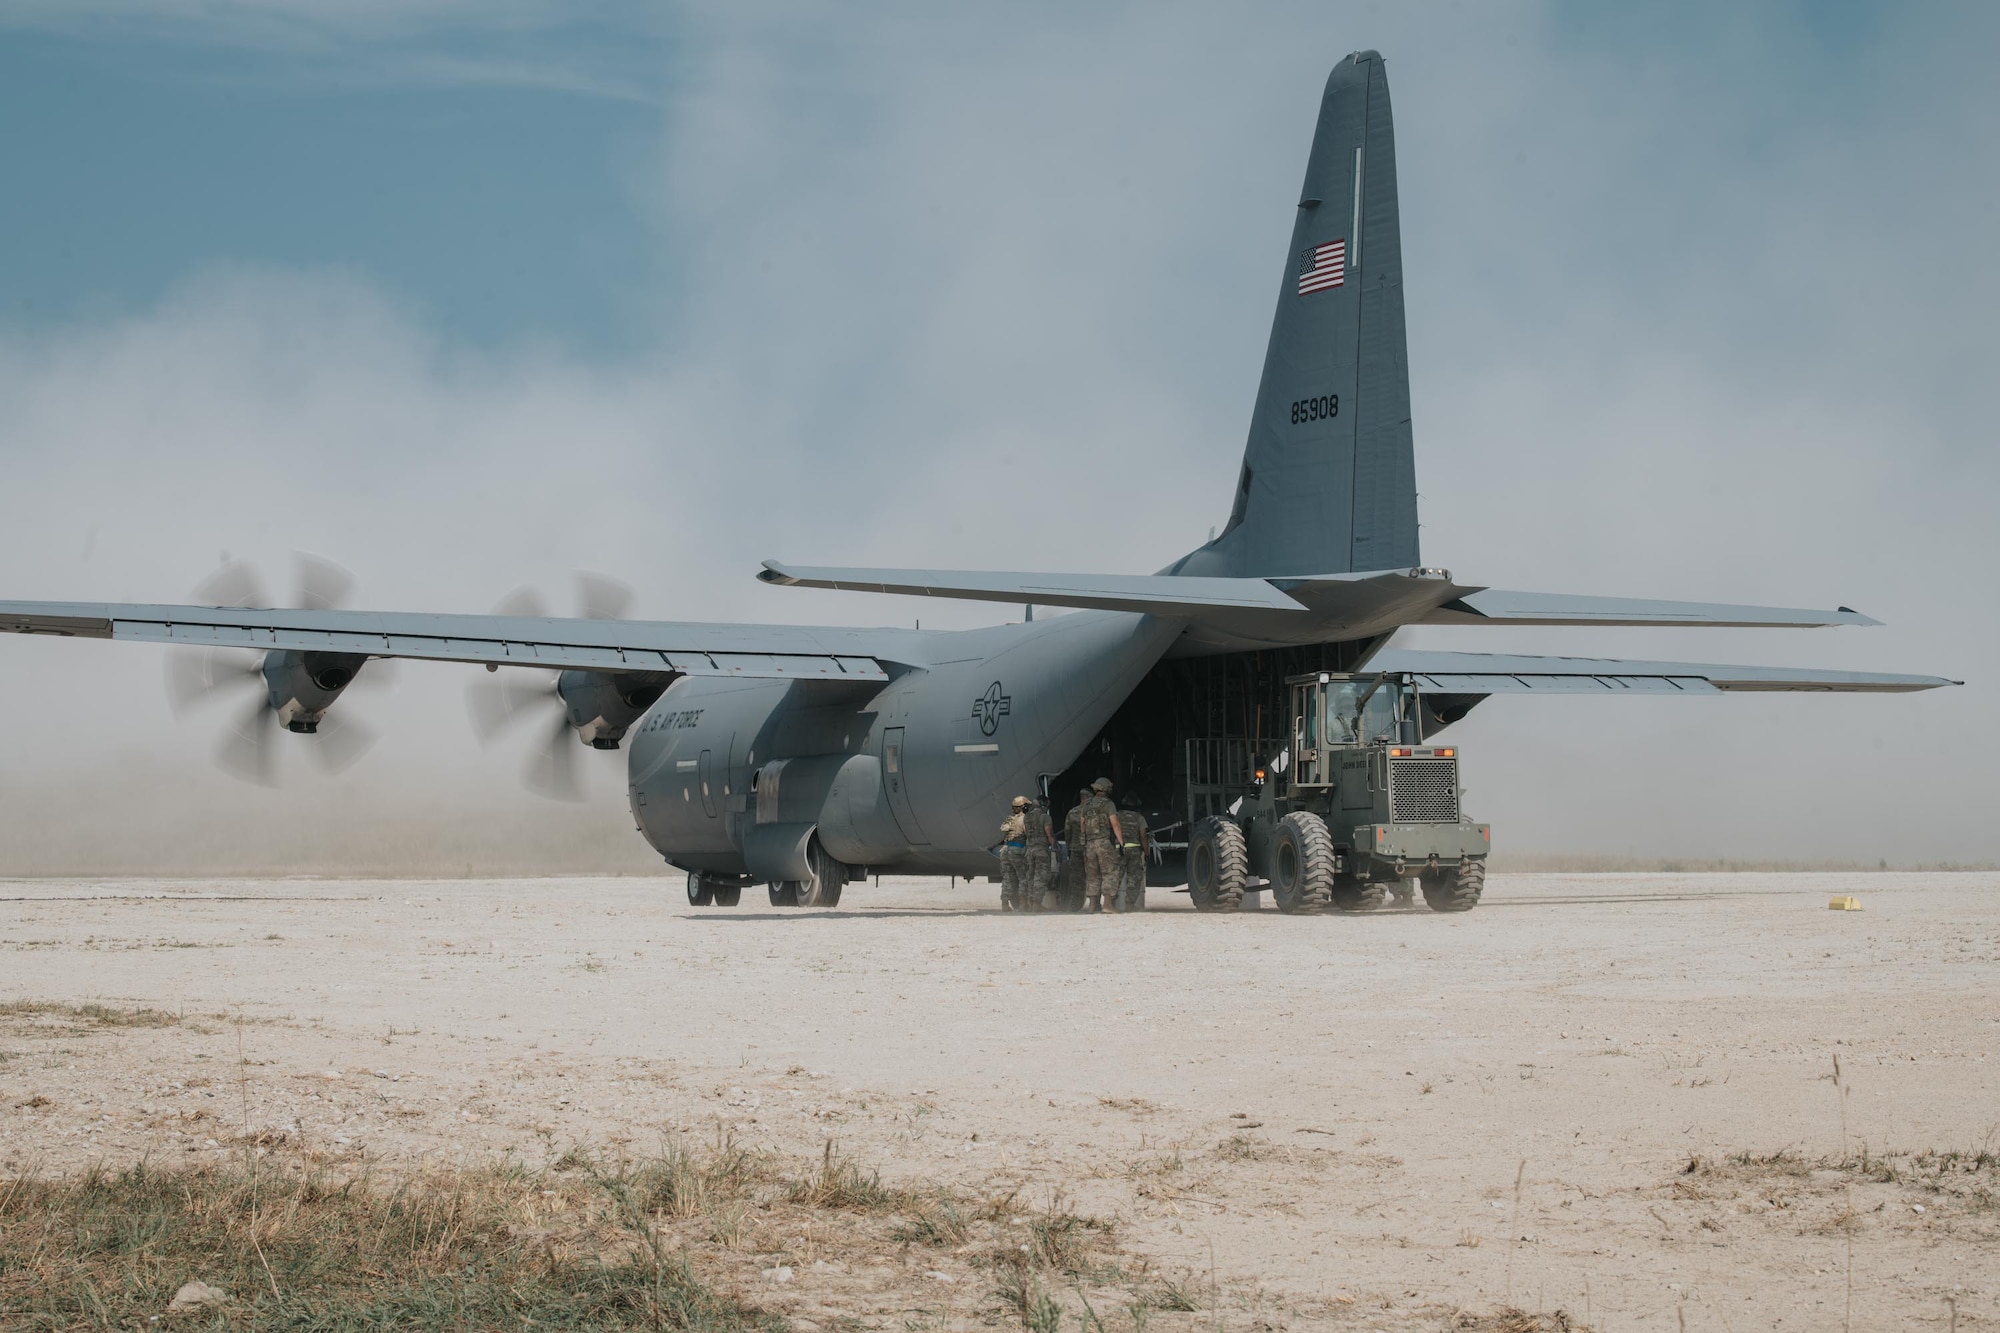 Airmen from the Kentucky Air National Guard’s 123rd Contingency Response Group perform an engine-running offload from a C-130 Hercules during a large-scale exercise in Logan, W.Va.., on July 22, 2021. The training took place during a week-long exercise named Sentry Storm 2021 that featured multiple units from the Air and Army National Guard, U.S. Air Force, Air Force Reserve, U.S. Navy and Civil Air Patrol. (U.S. Air National Guard photo by Staff Sgt. Vincent Santos)